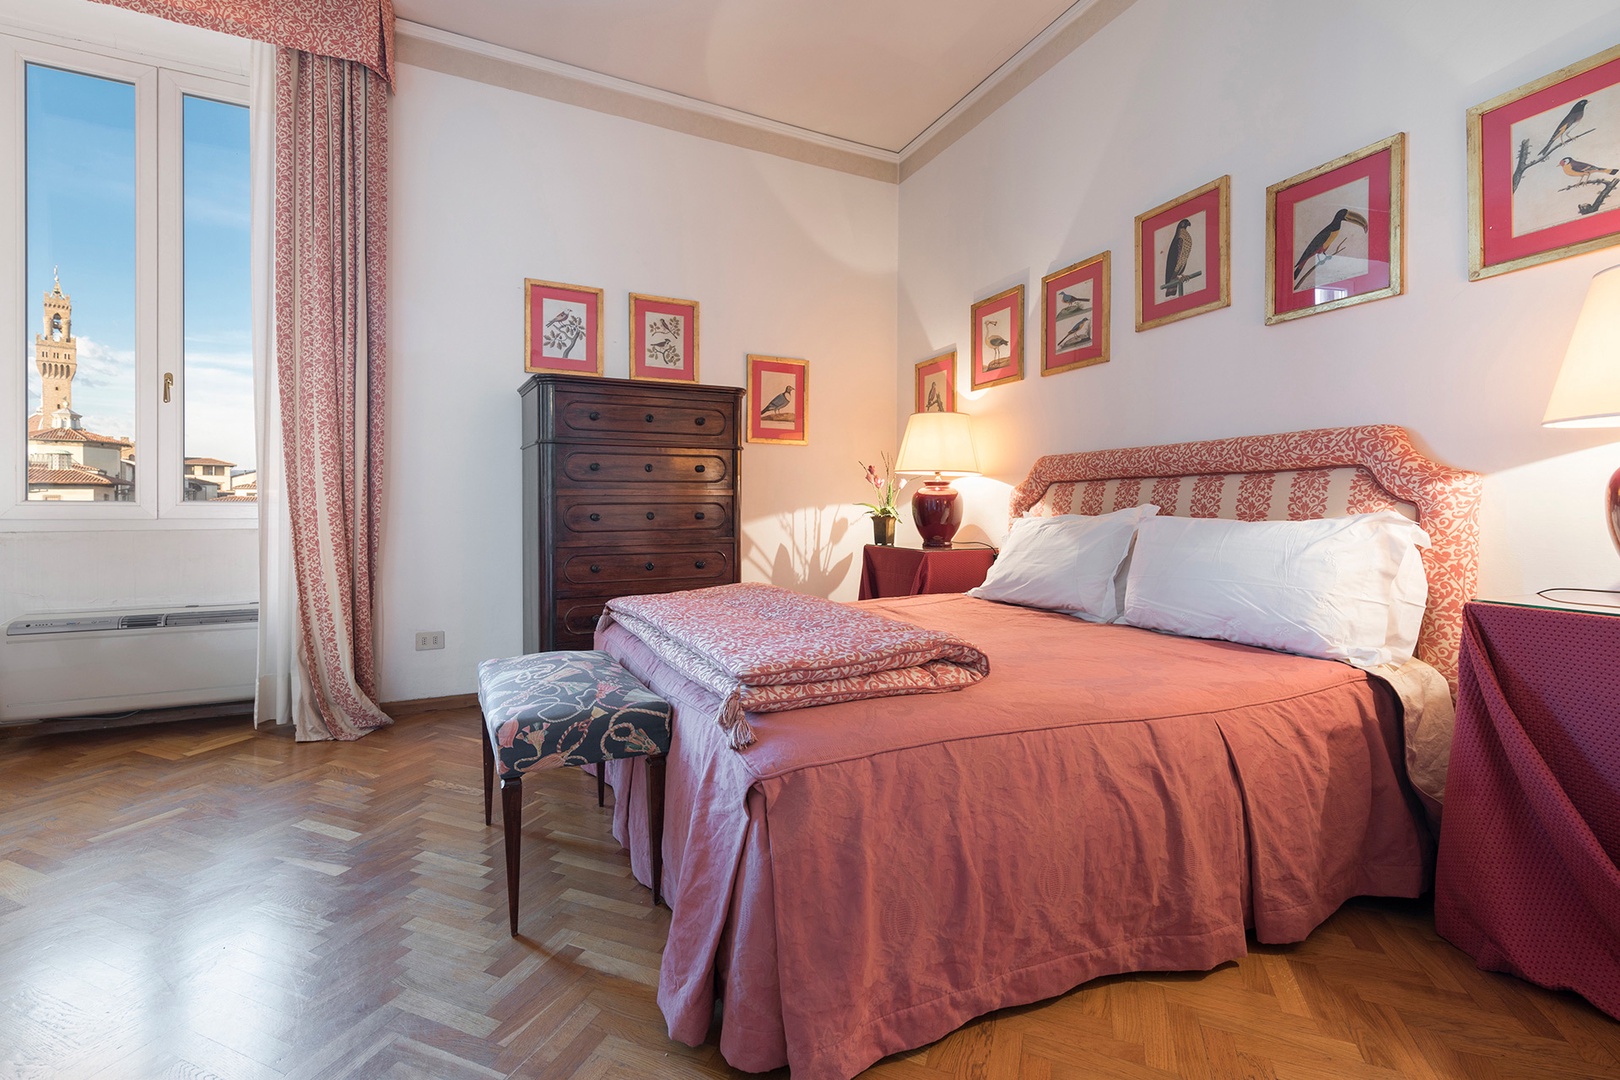 Bedroom 1 has beautiful Arno river views with a bed that can be split to form two beds.